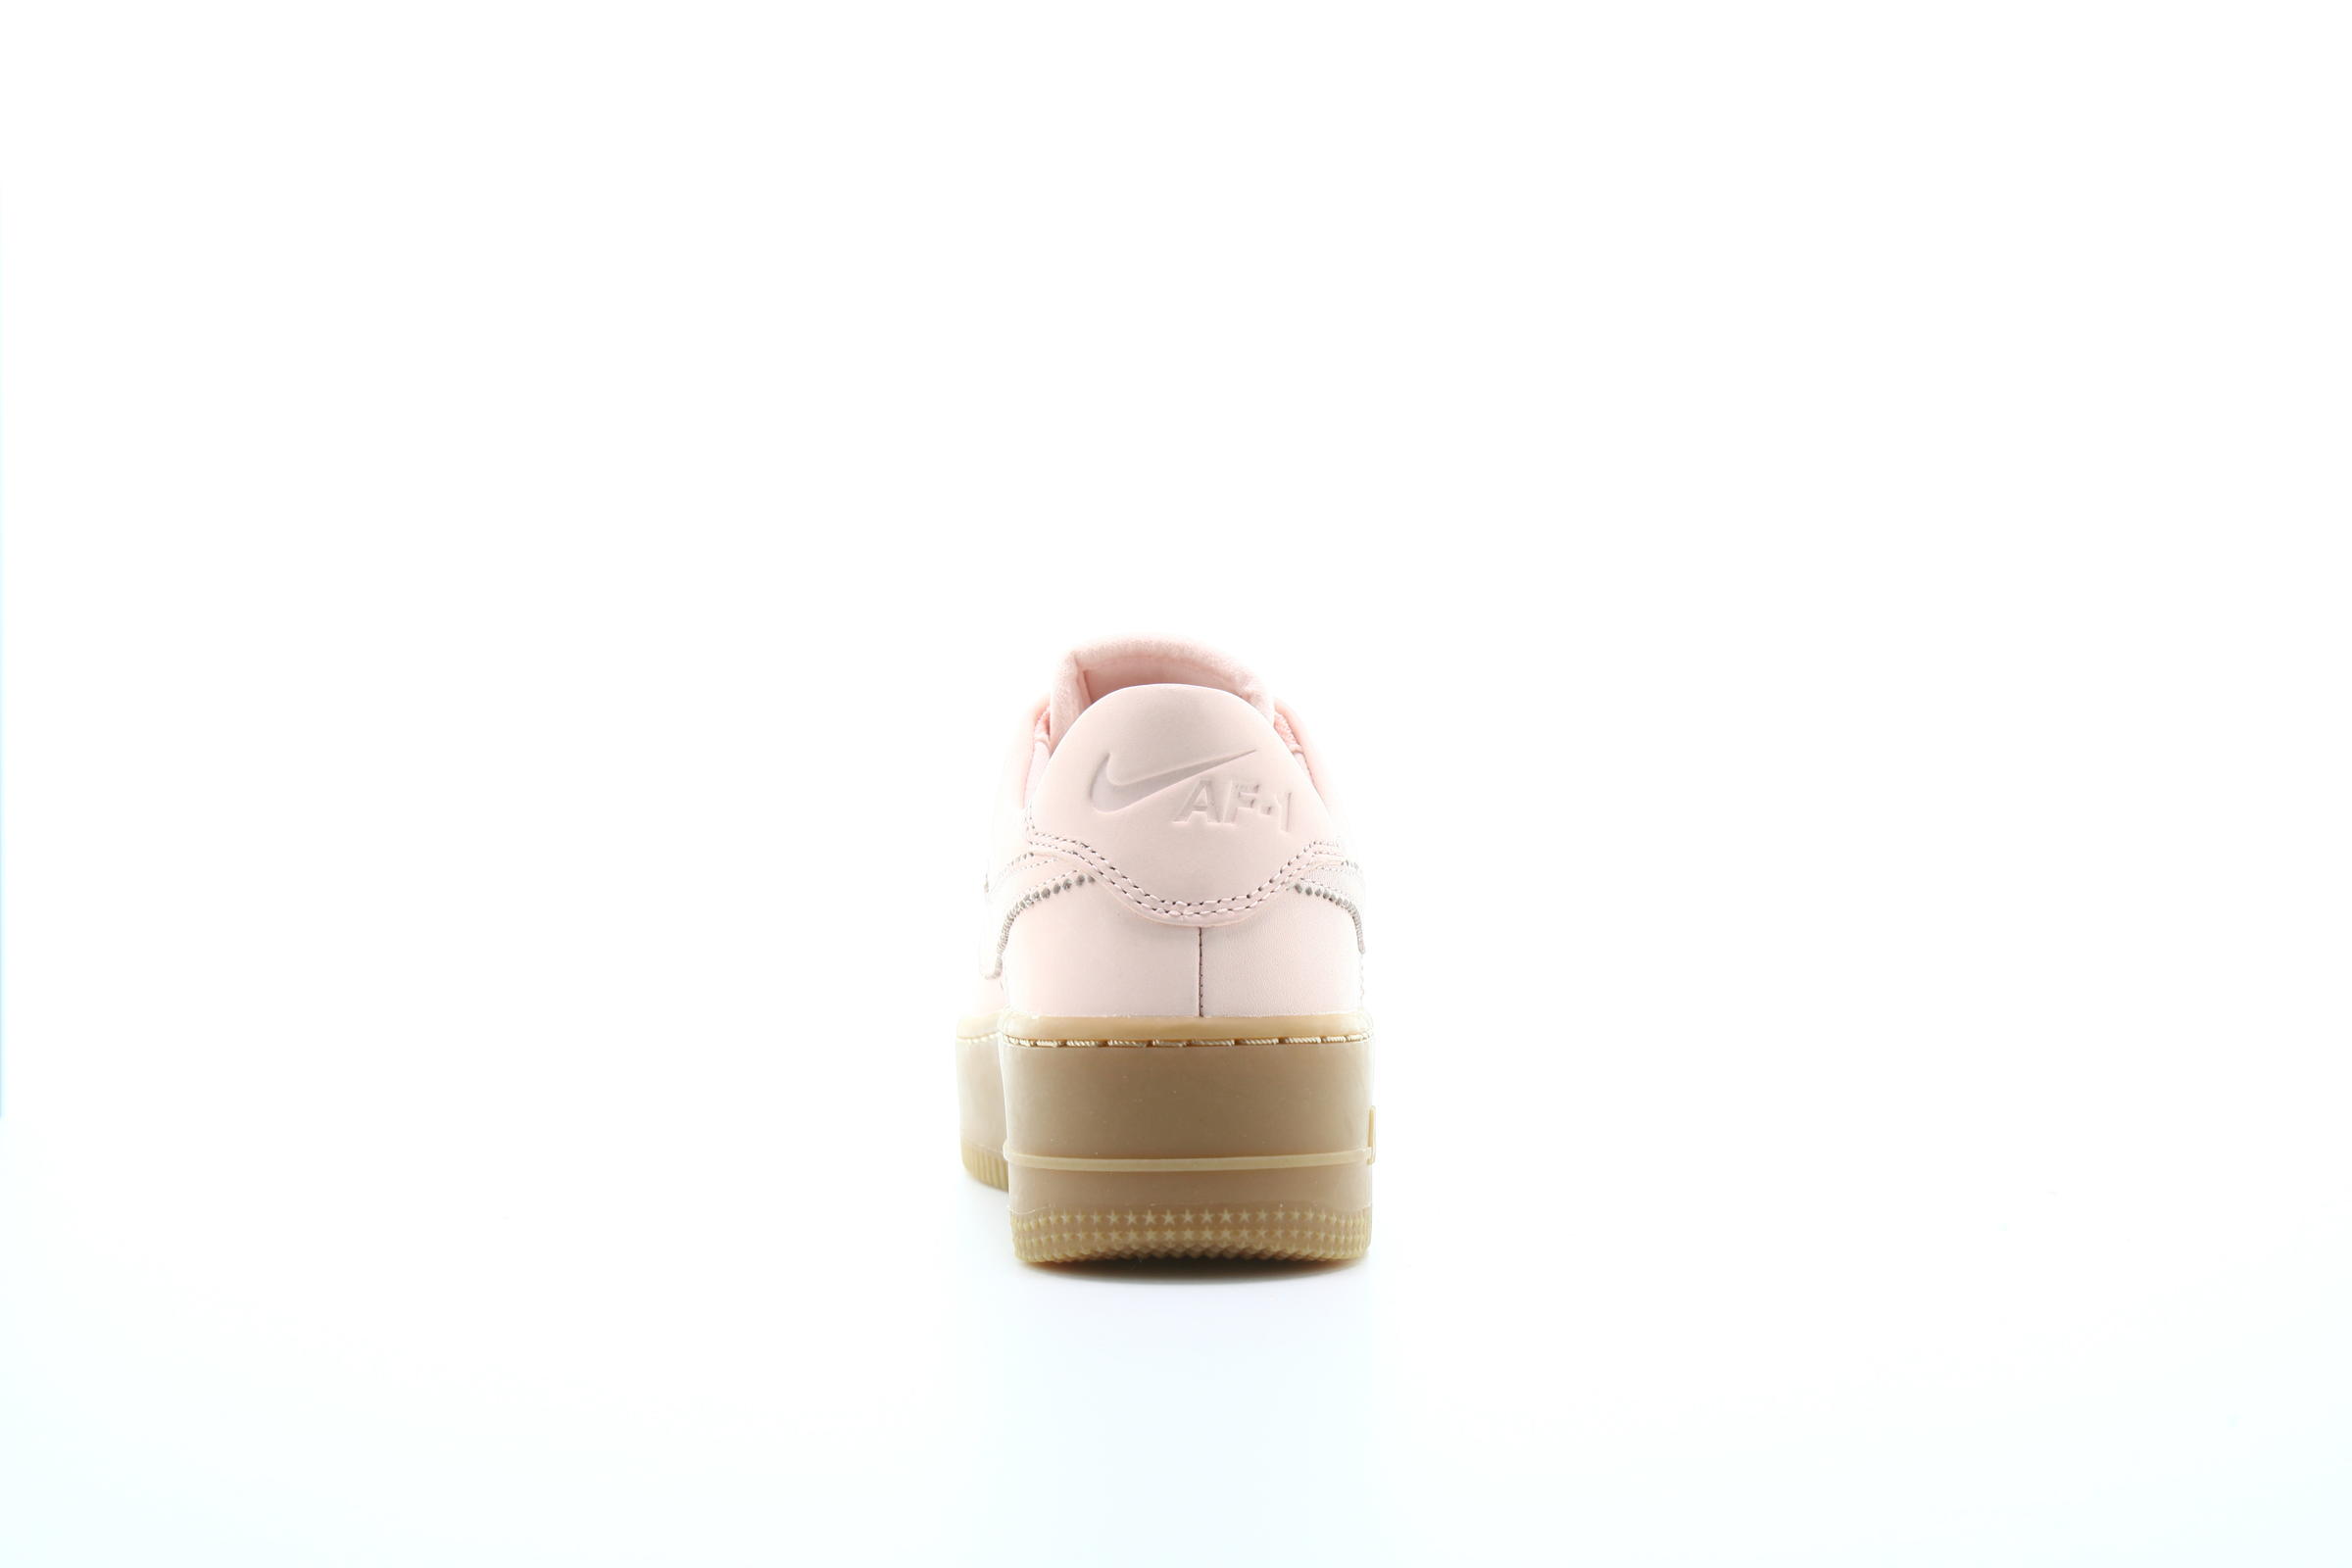 Nike WMS Air Force 1 Sage Low LX "Pale Ivory"